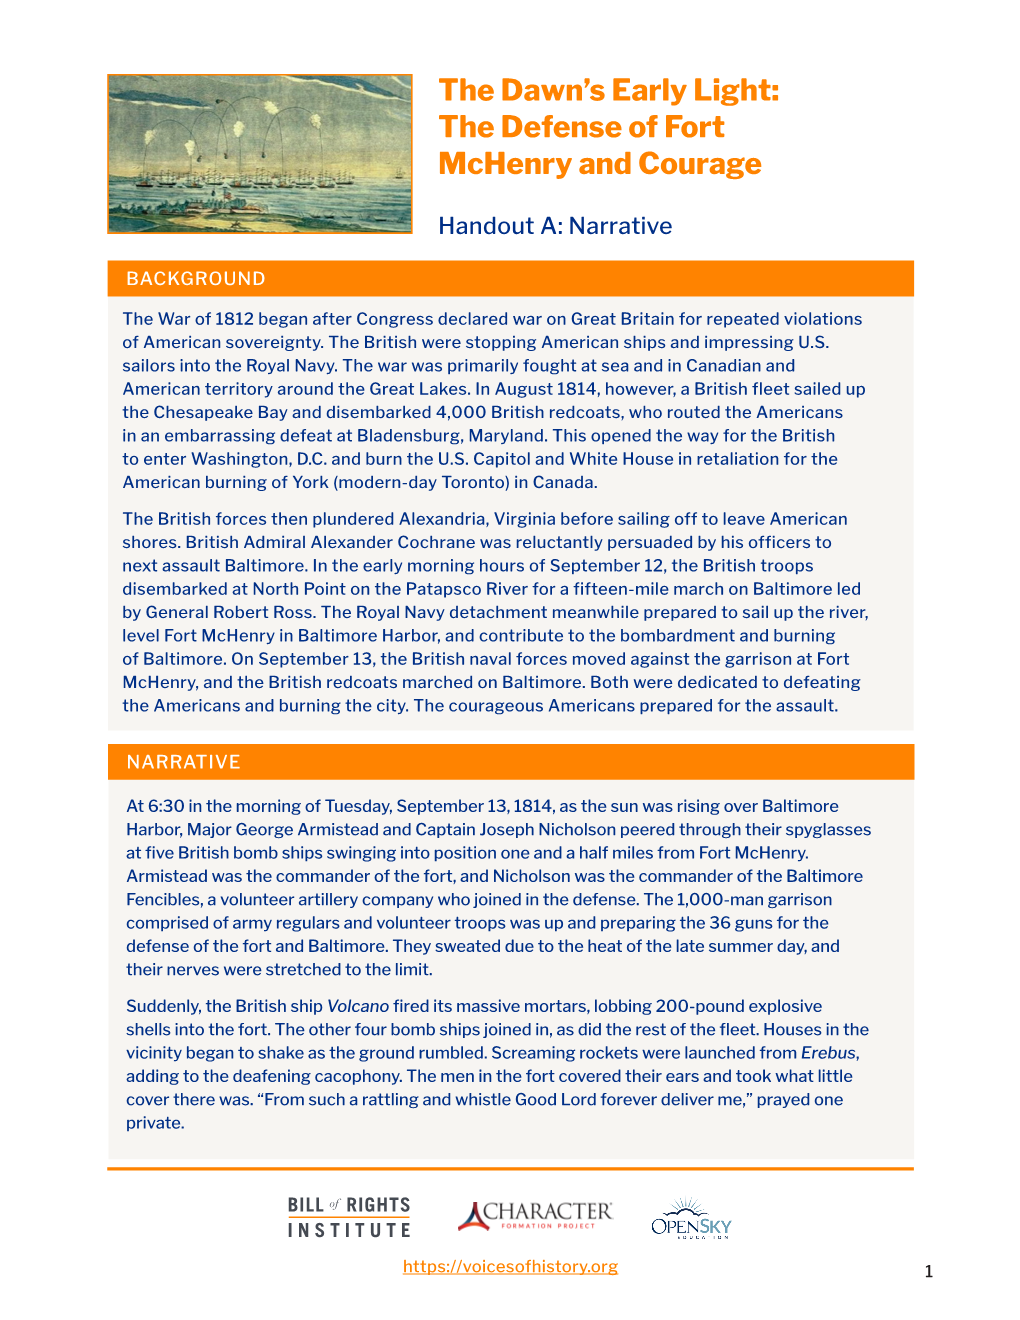 The Dawn's Early Light: the Defense of Fort Mchenry and Courage